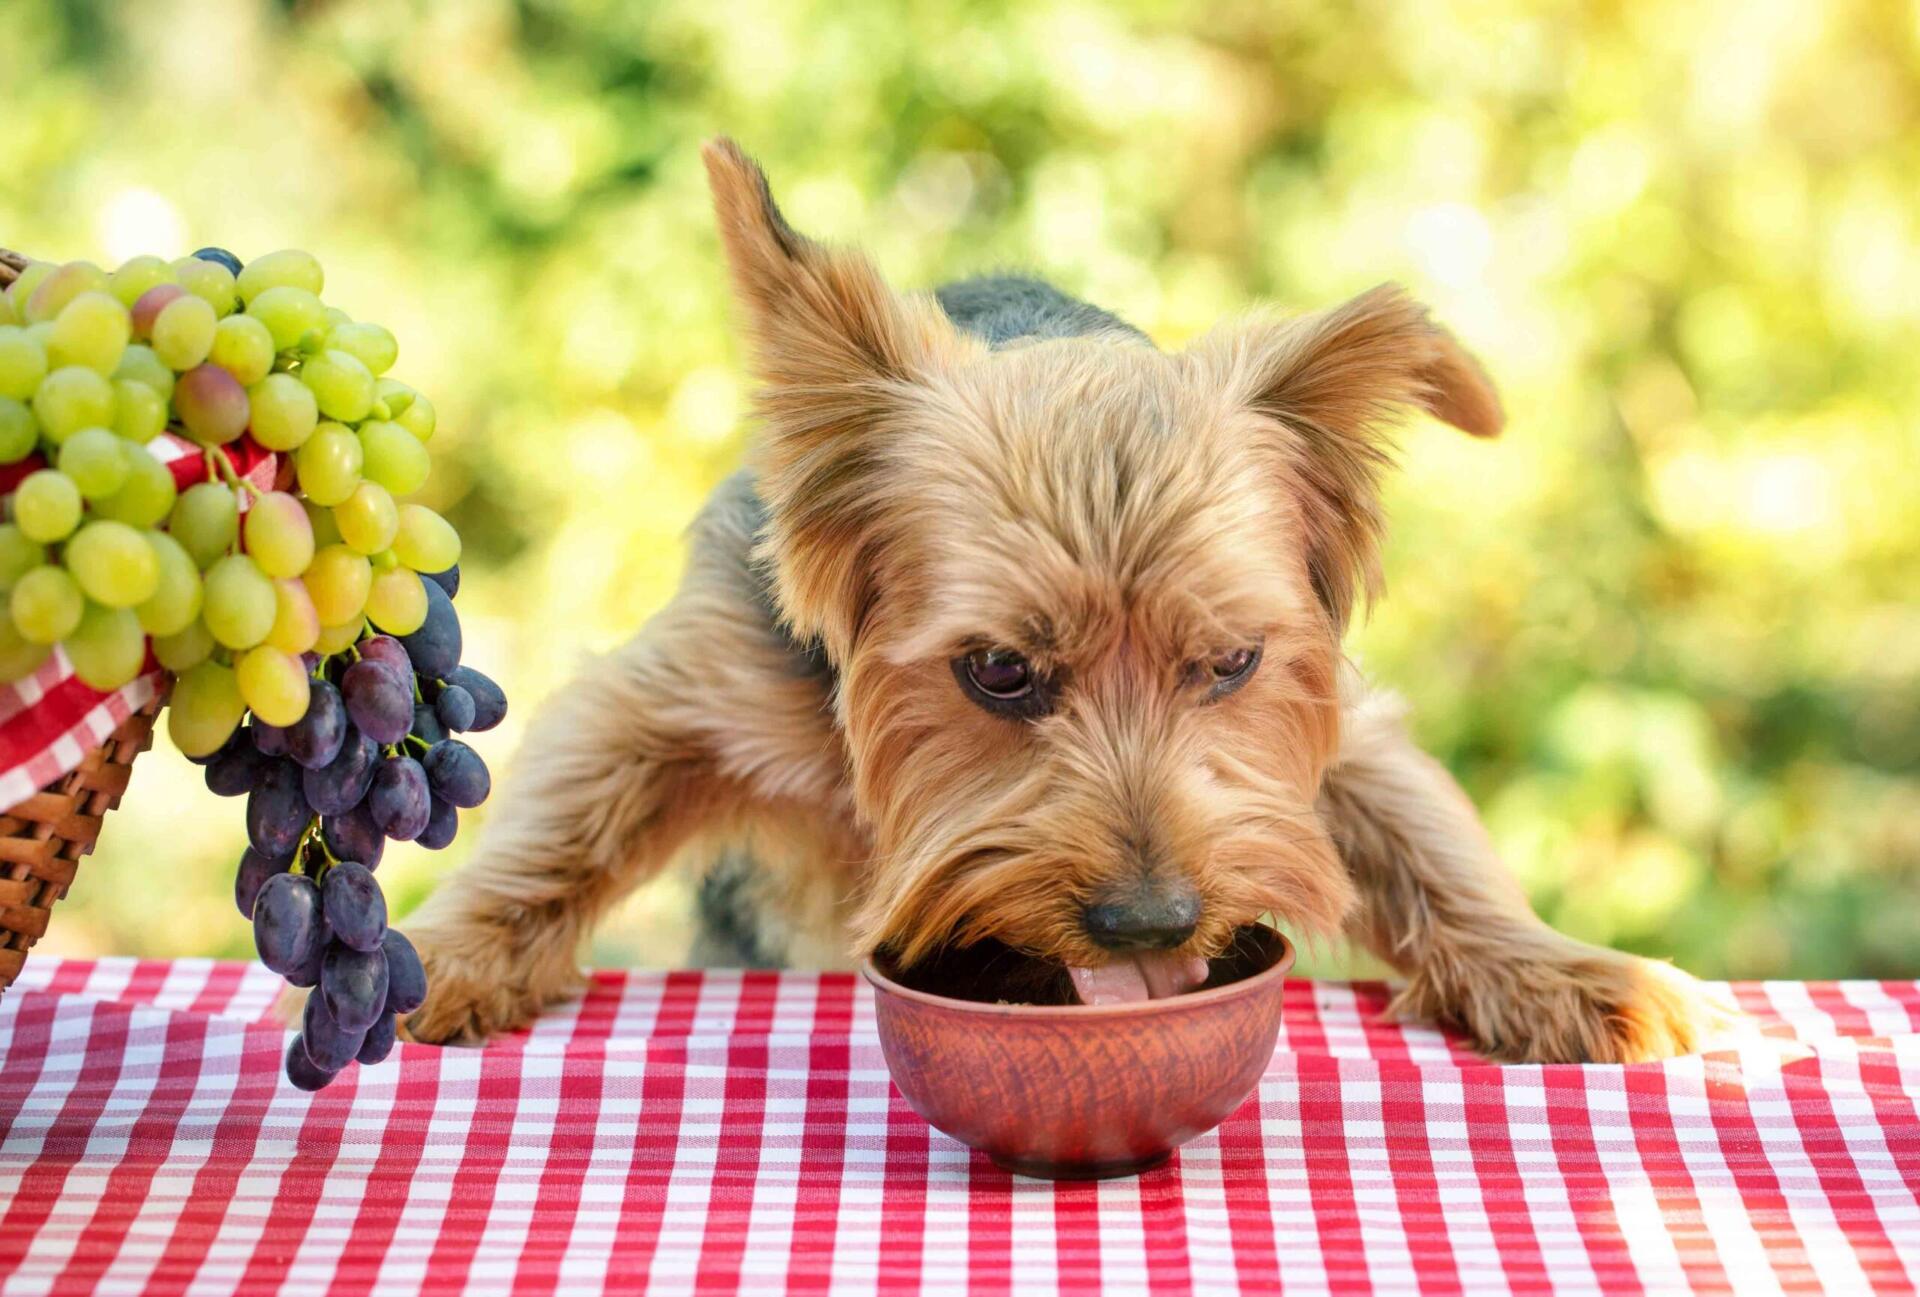 Pet eating a healthy dog diet